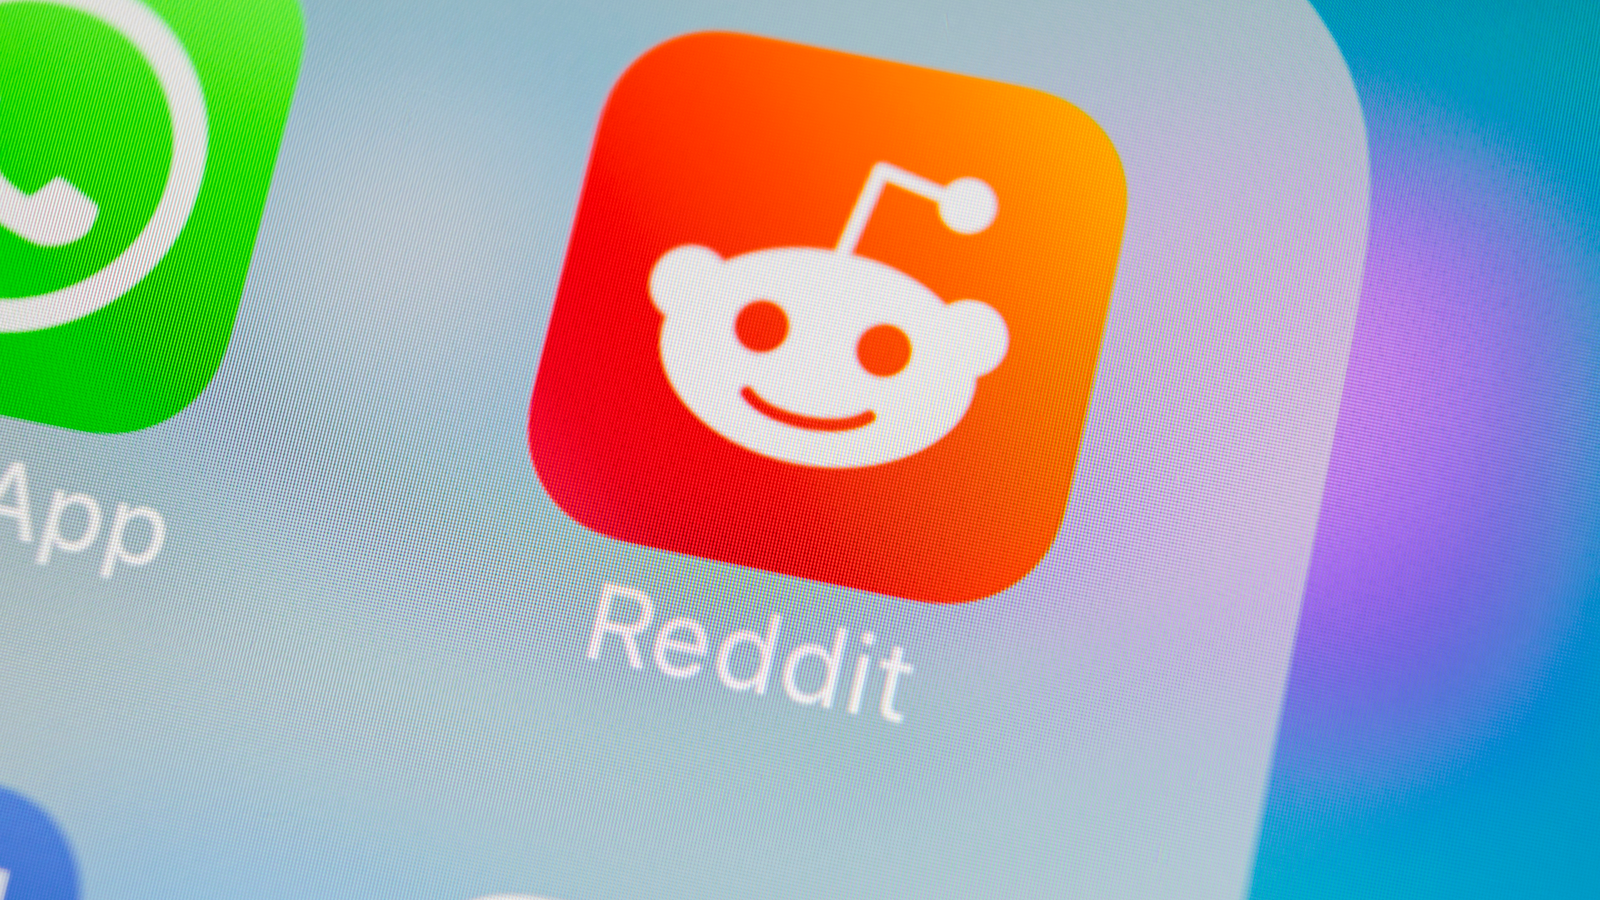 Reddit's Cryptocurrency MOON Plummets by 90%, Community Furious